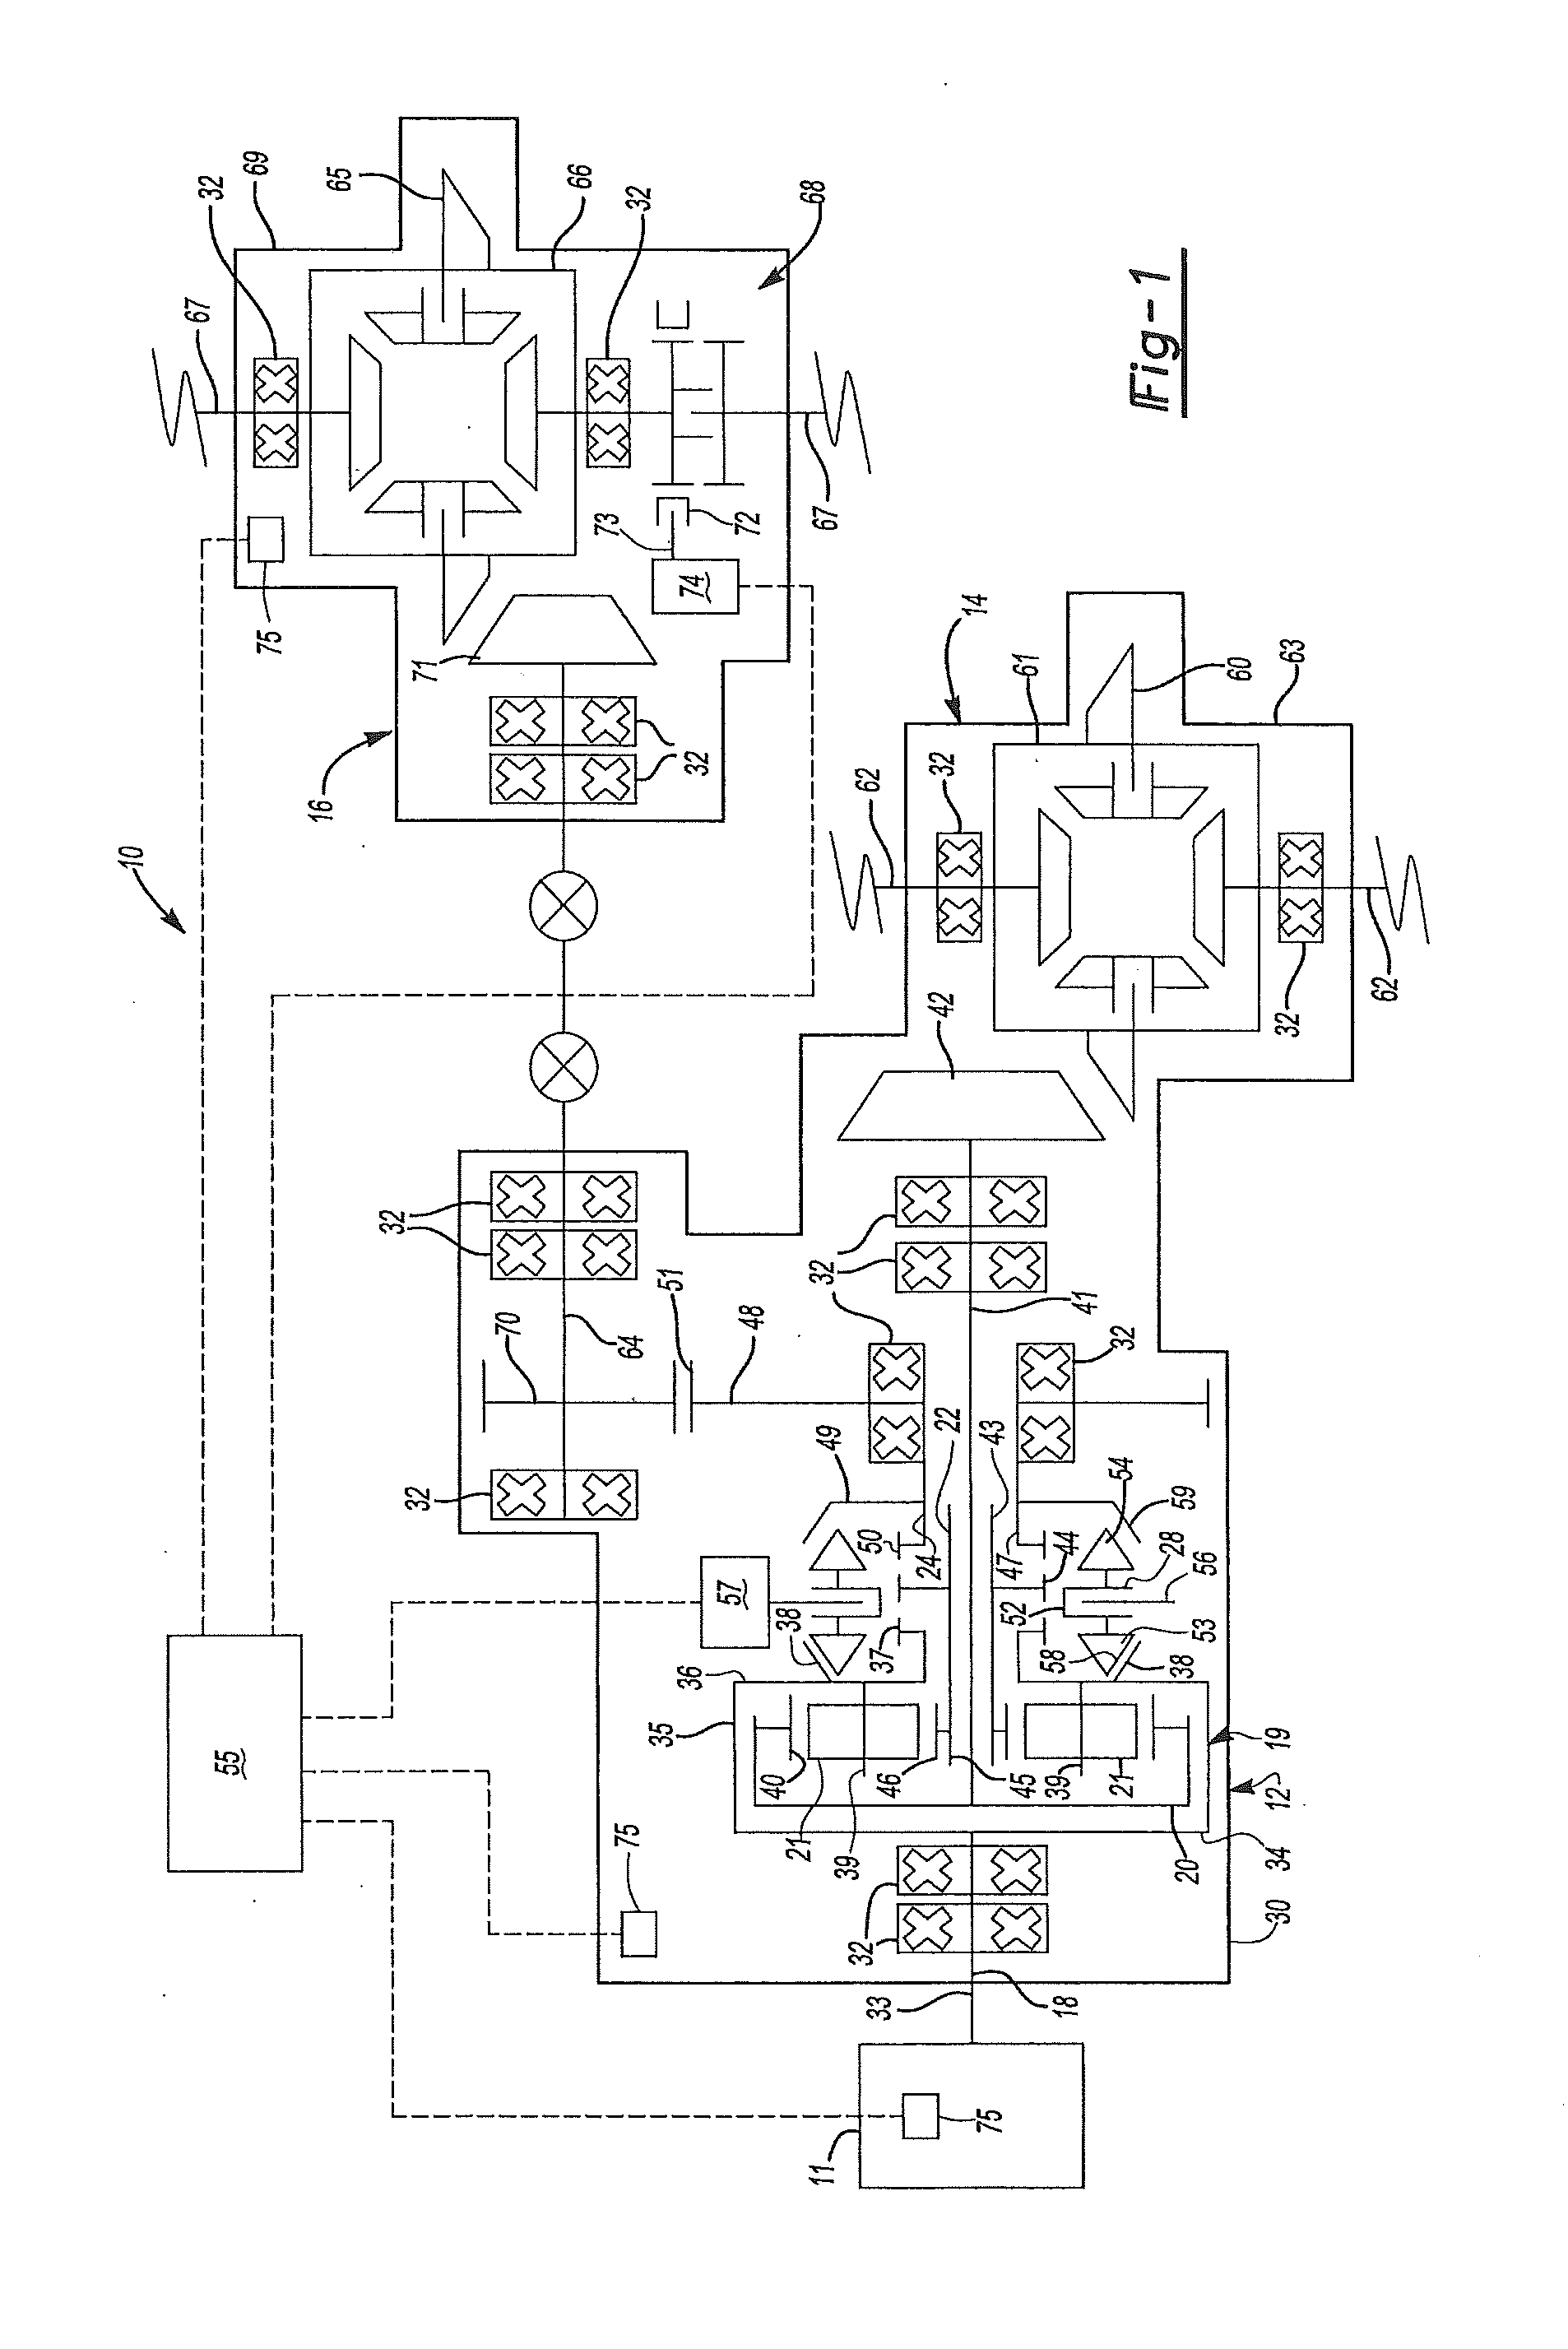 Multi-mode tandem axle function selection apparatus and method